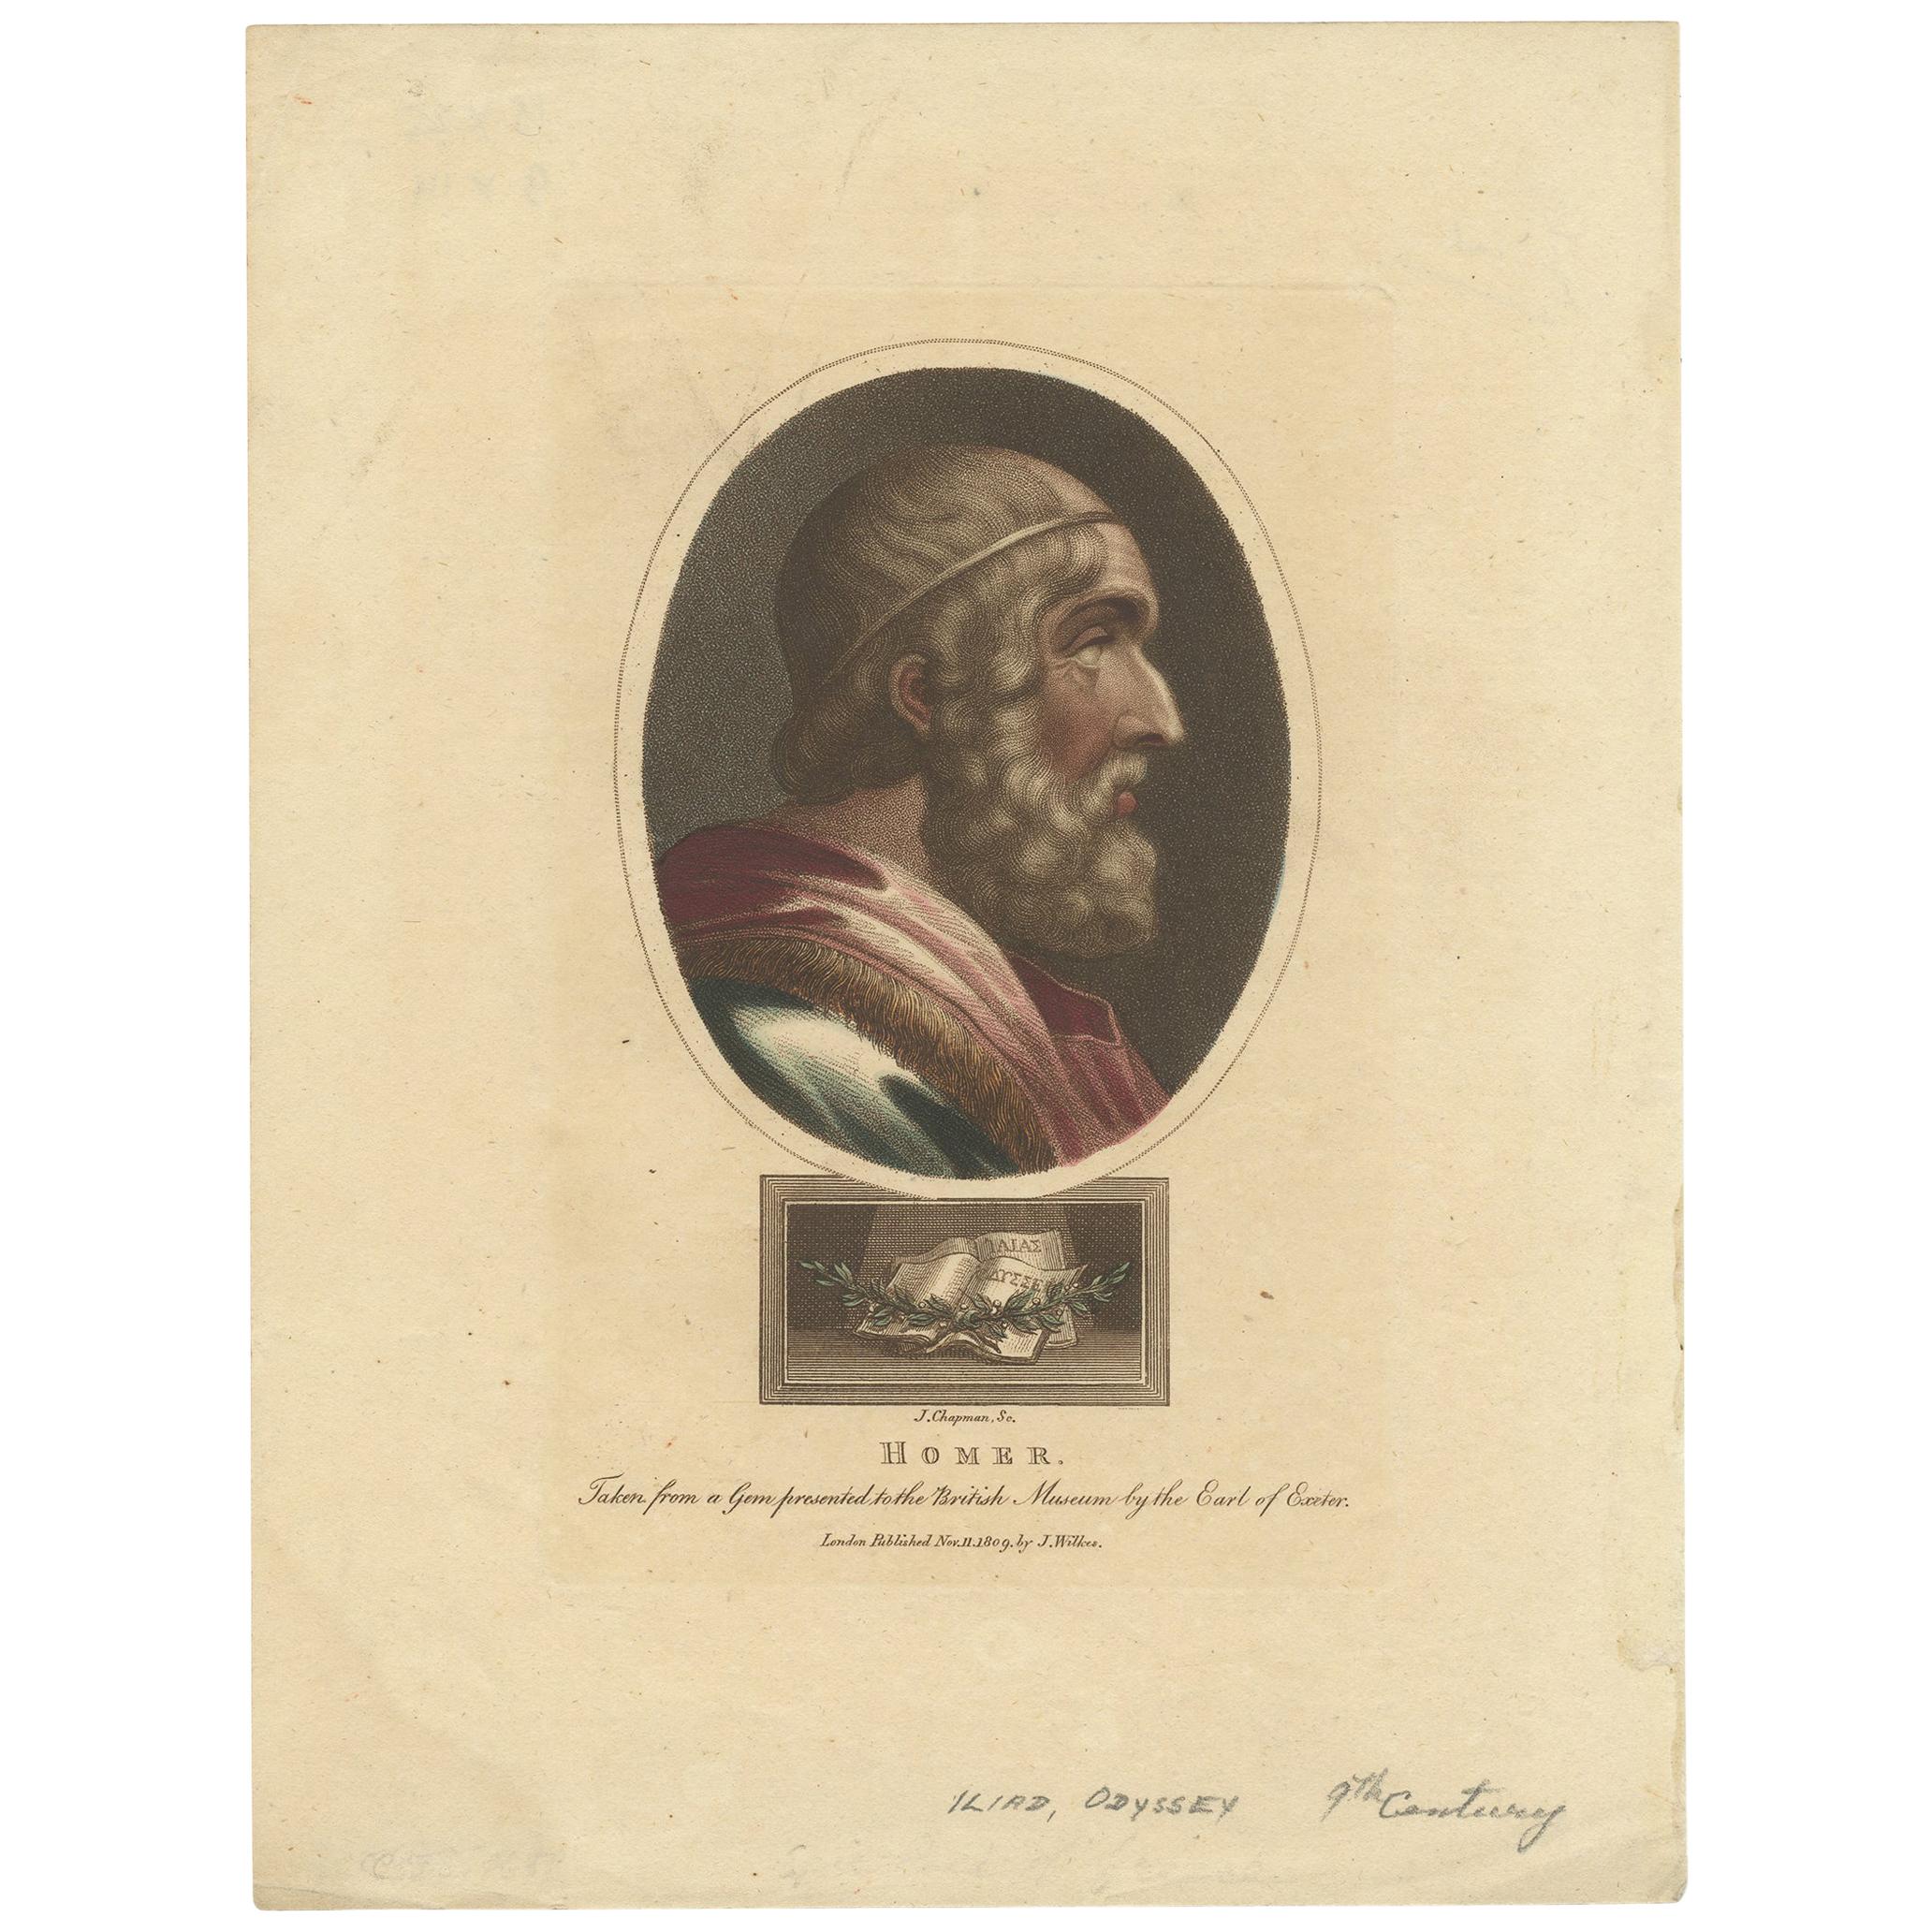 Antique Portrait of Homer by Wilkes